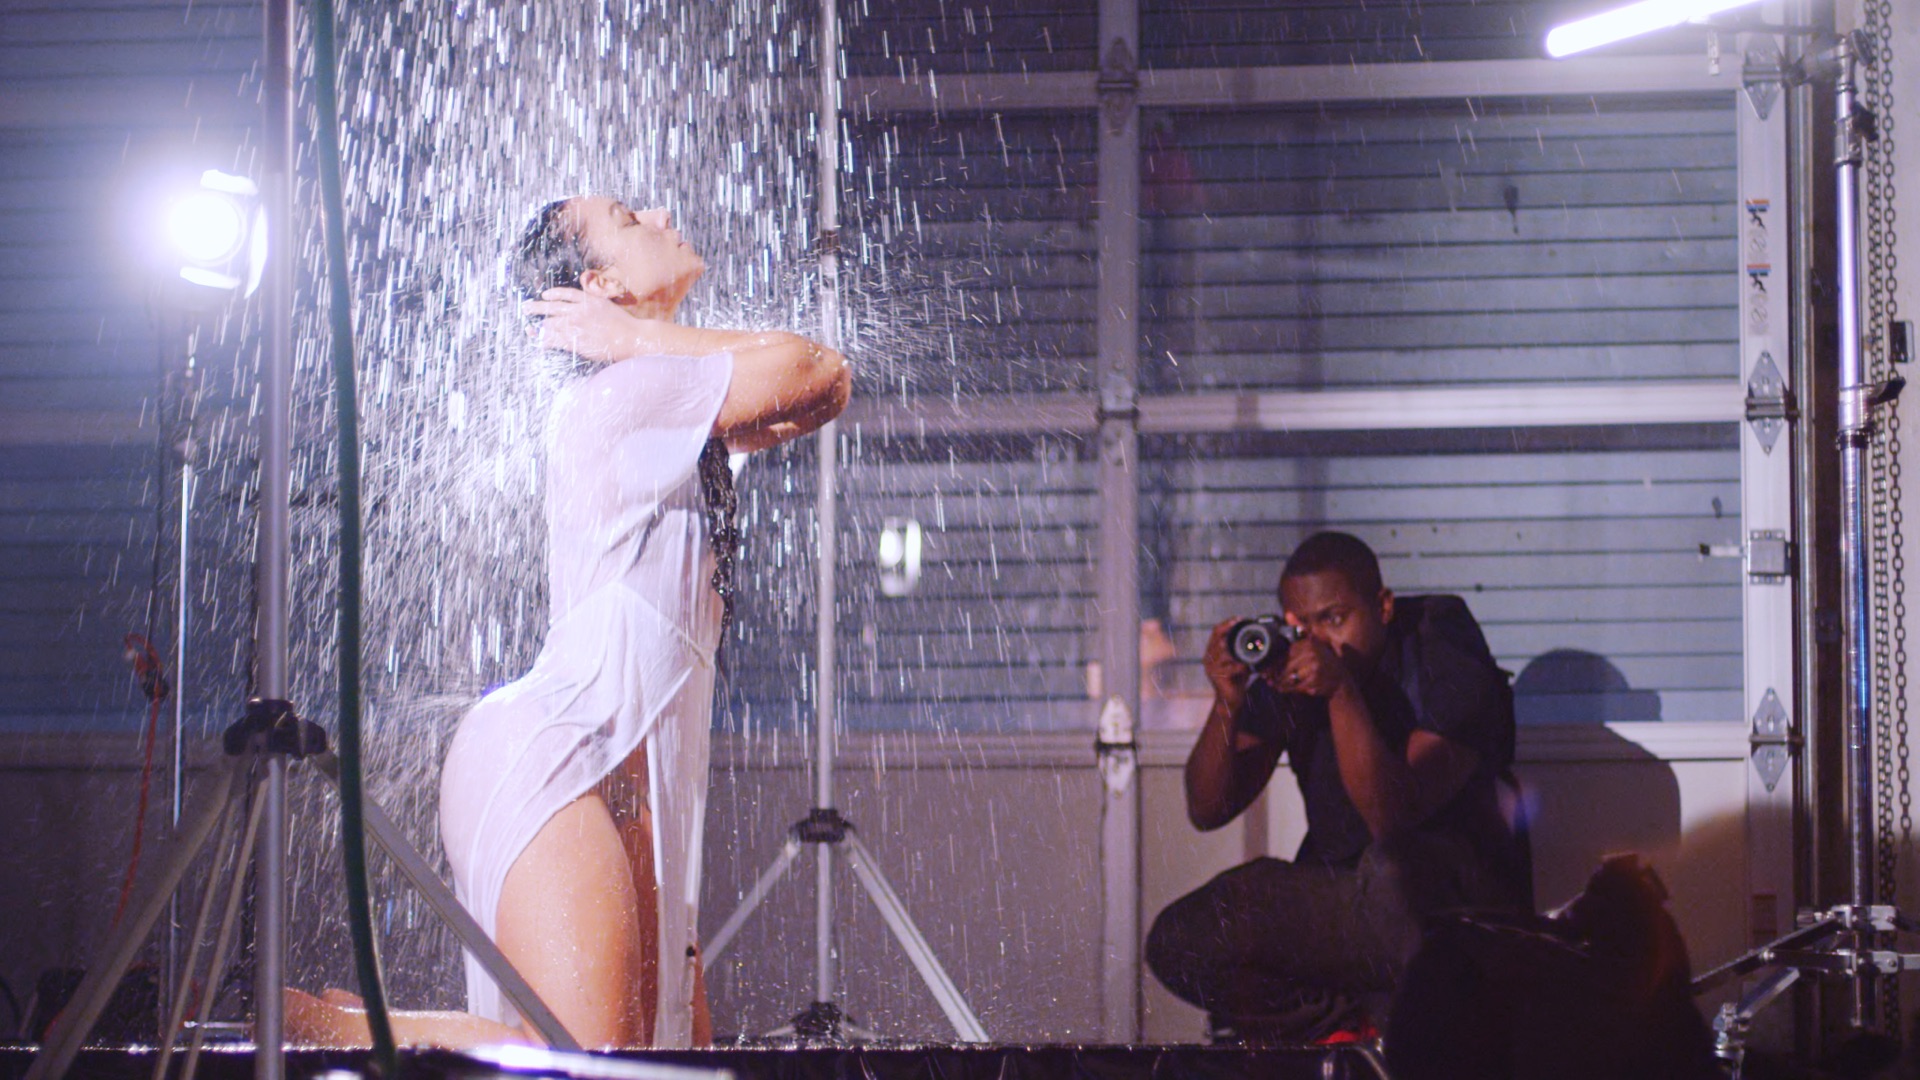 A female model clad in a see through outfit wearing jewelry under a shower on a set being photographed by an African American male.